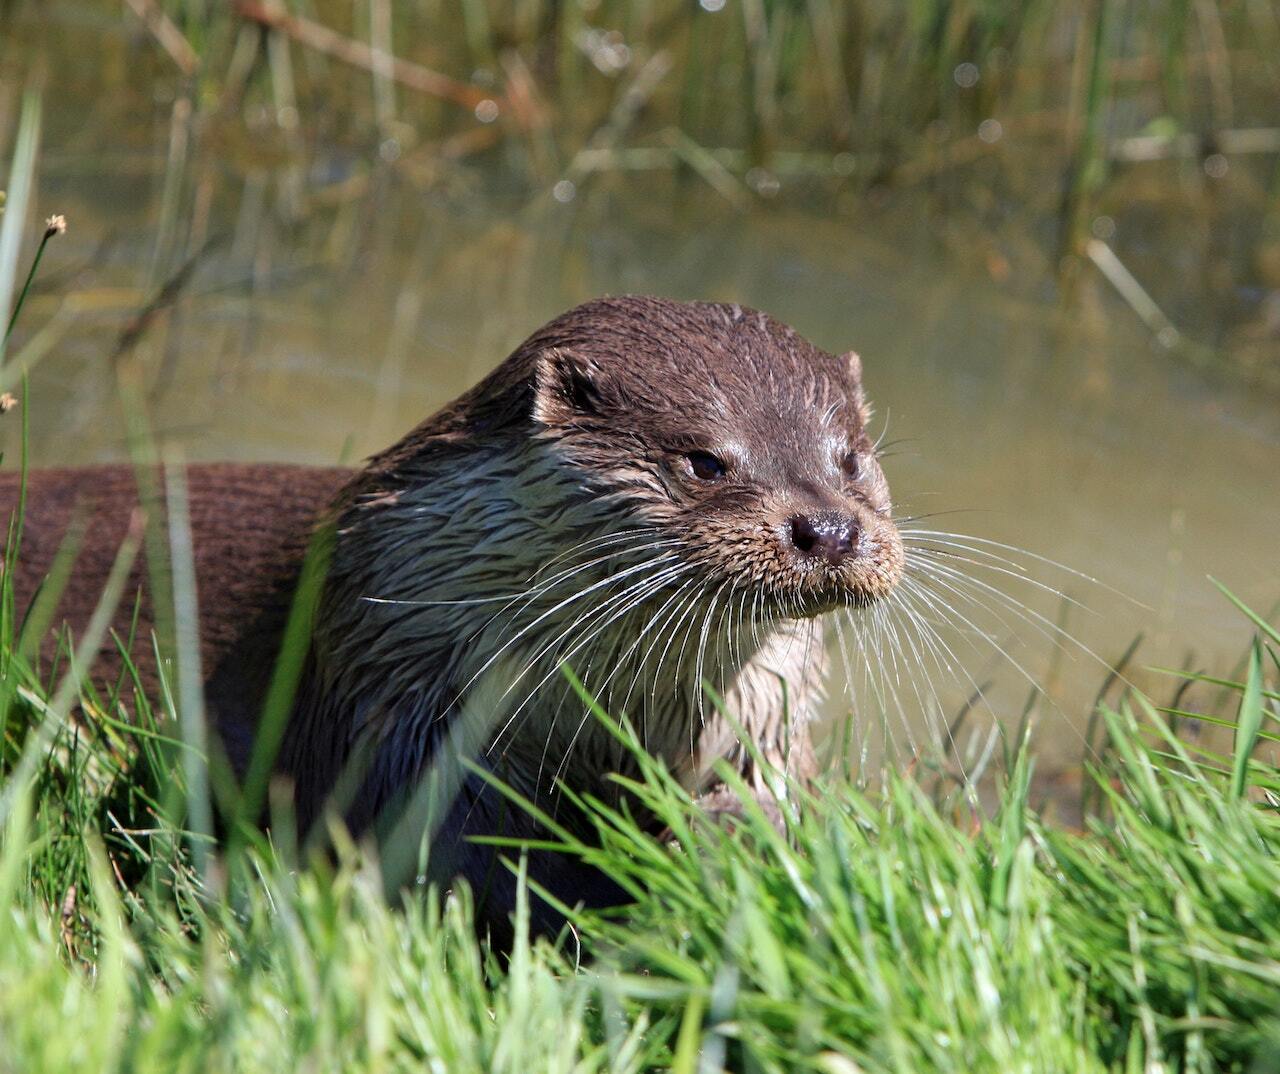 Otter Solway Ecology , Langhold, Dumfries and Galloway